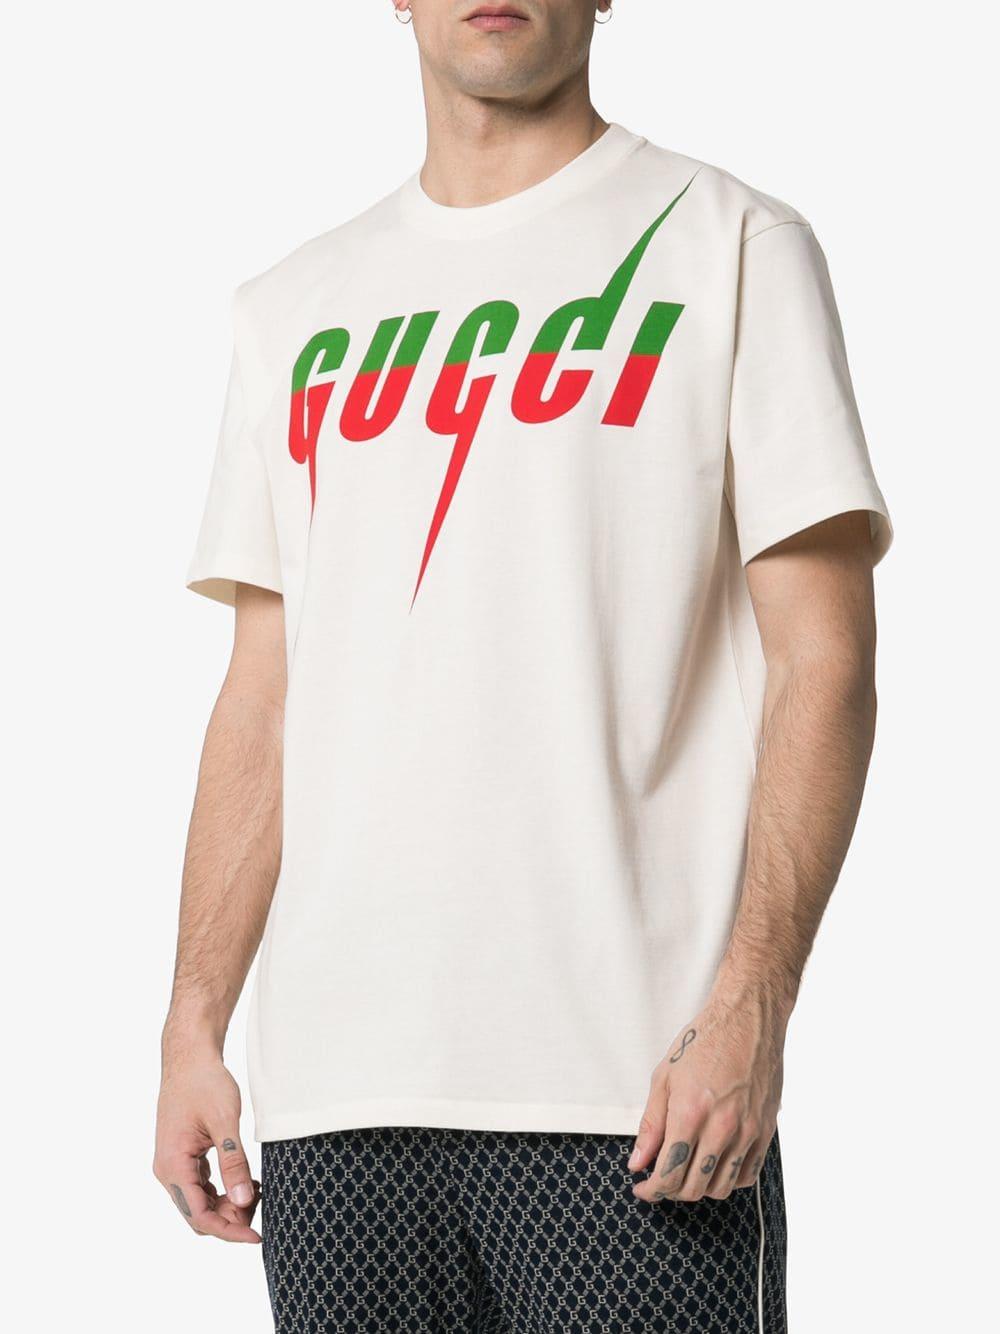 Gucci Cotton Blade T-shirt for Men - Save 33% - Lyst